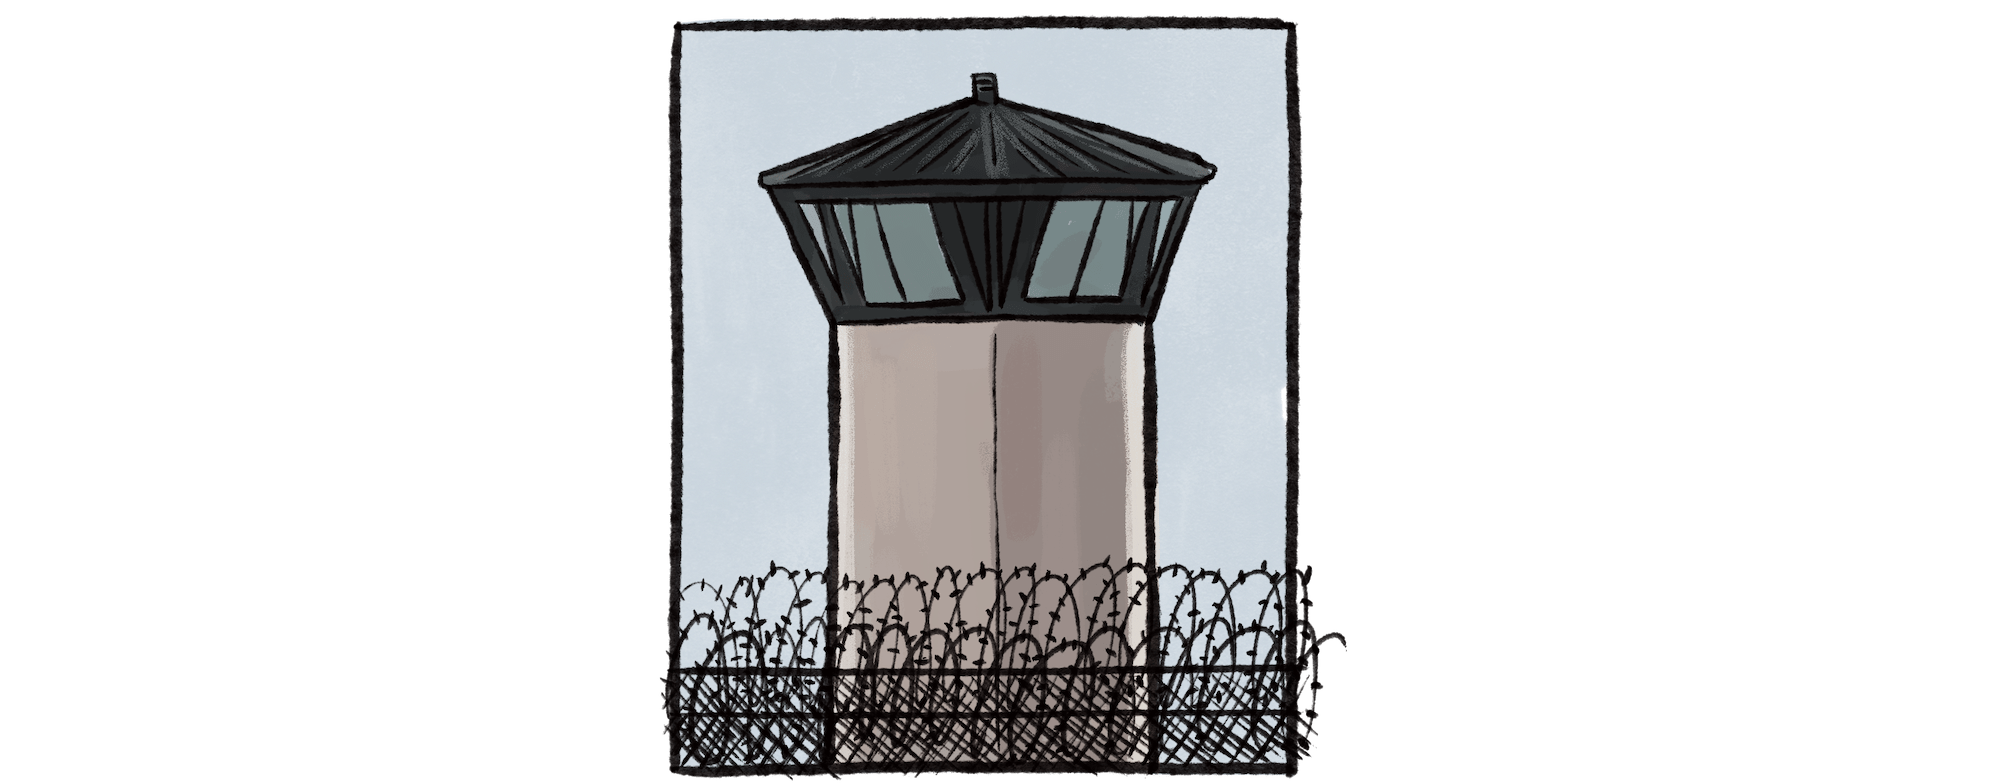 A watch tower rises above the top of a fence with razor wire.